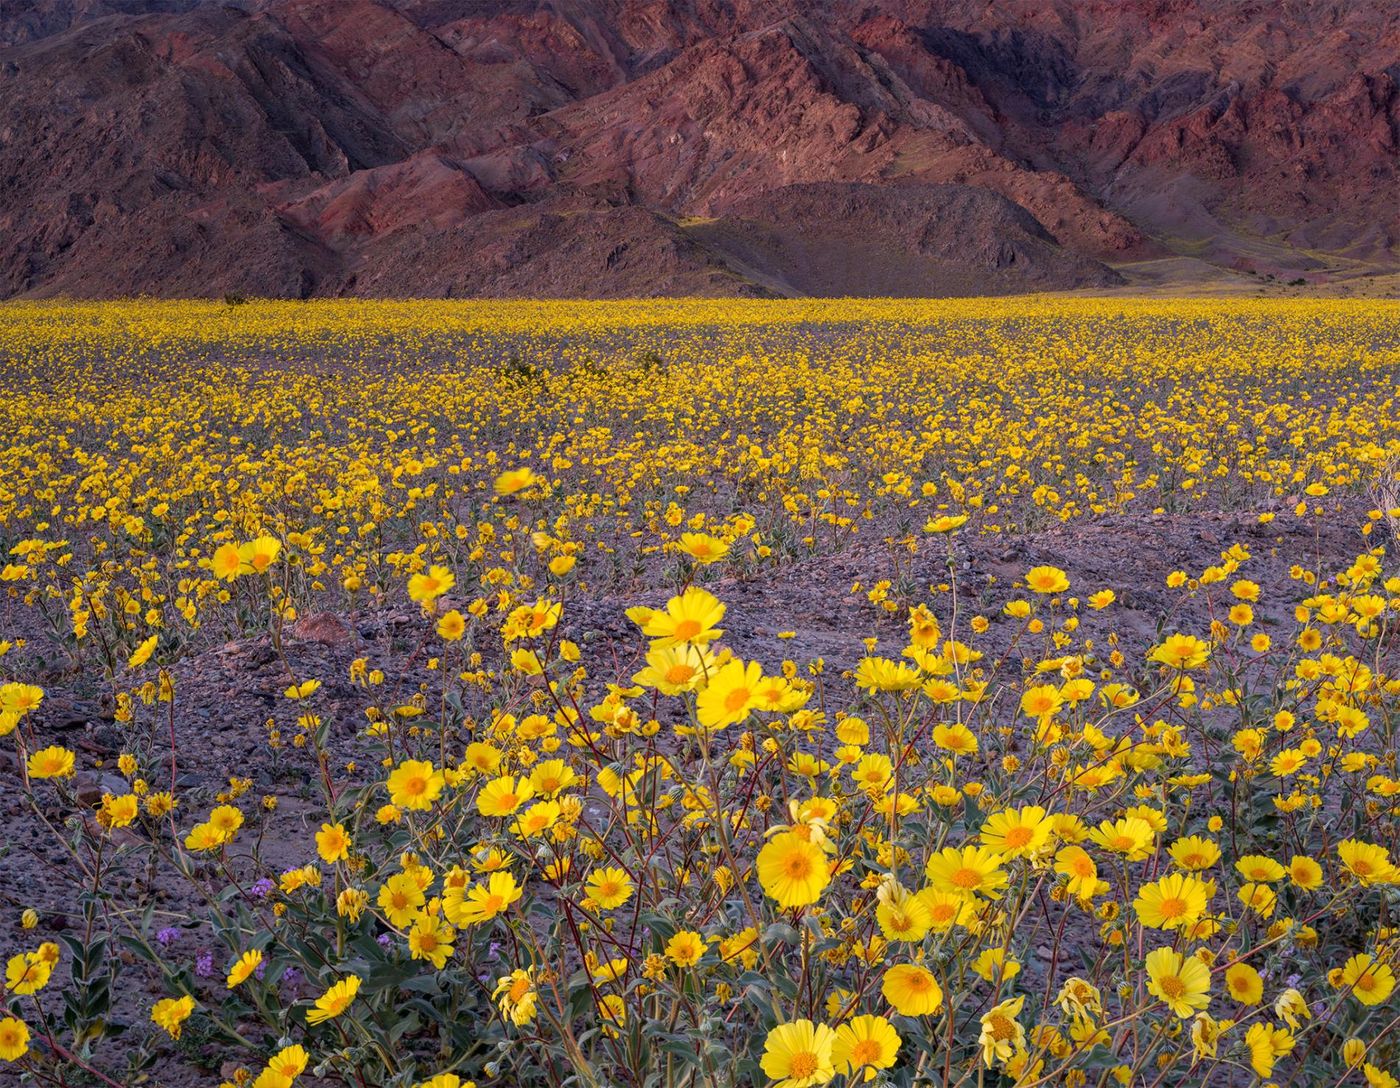 Death Valley National Park is being overrun by beautiful wildflowers... but it won't last long.